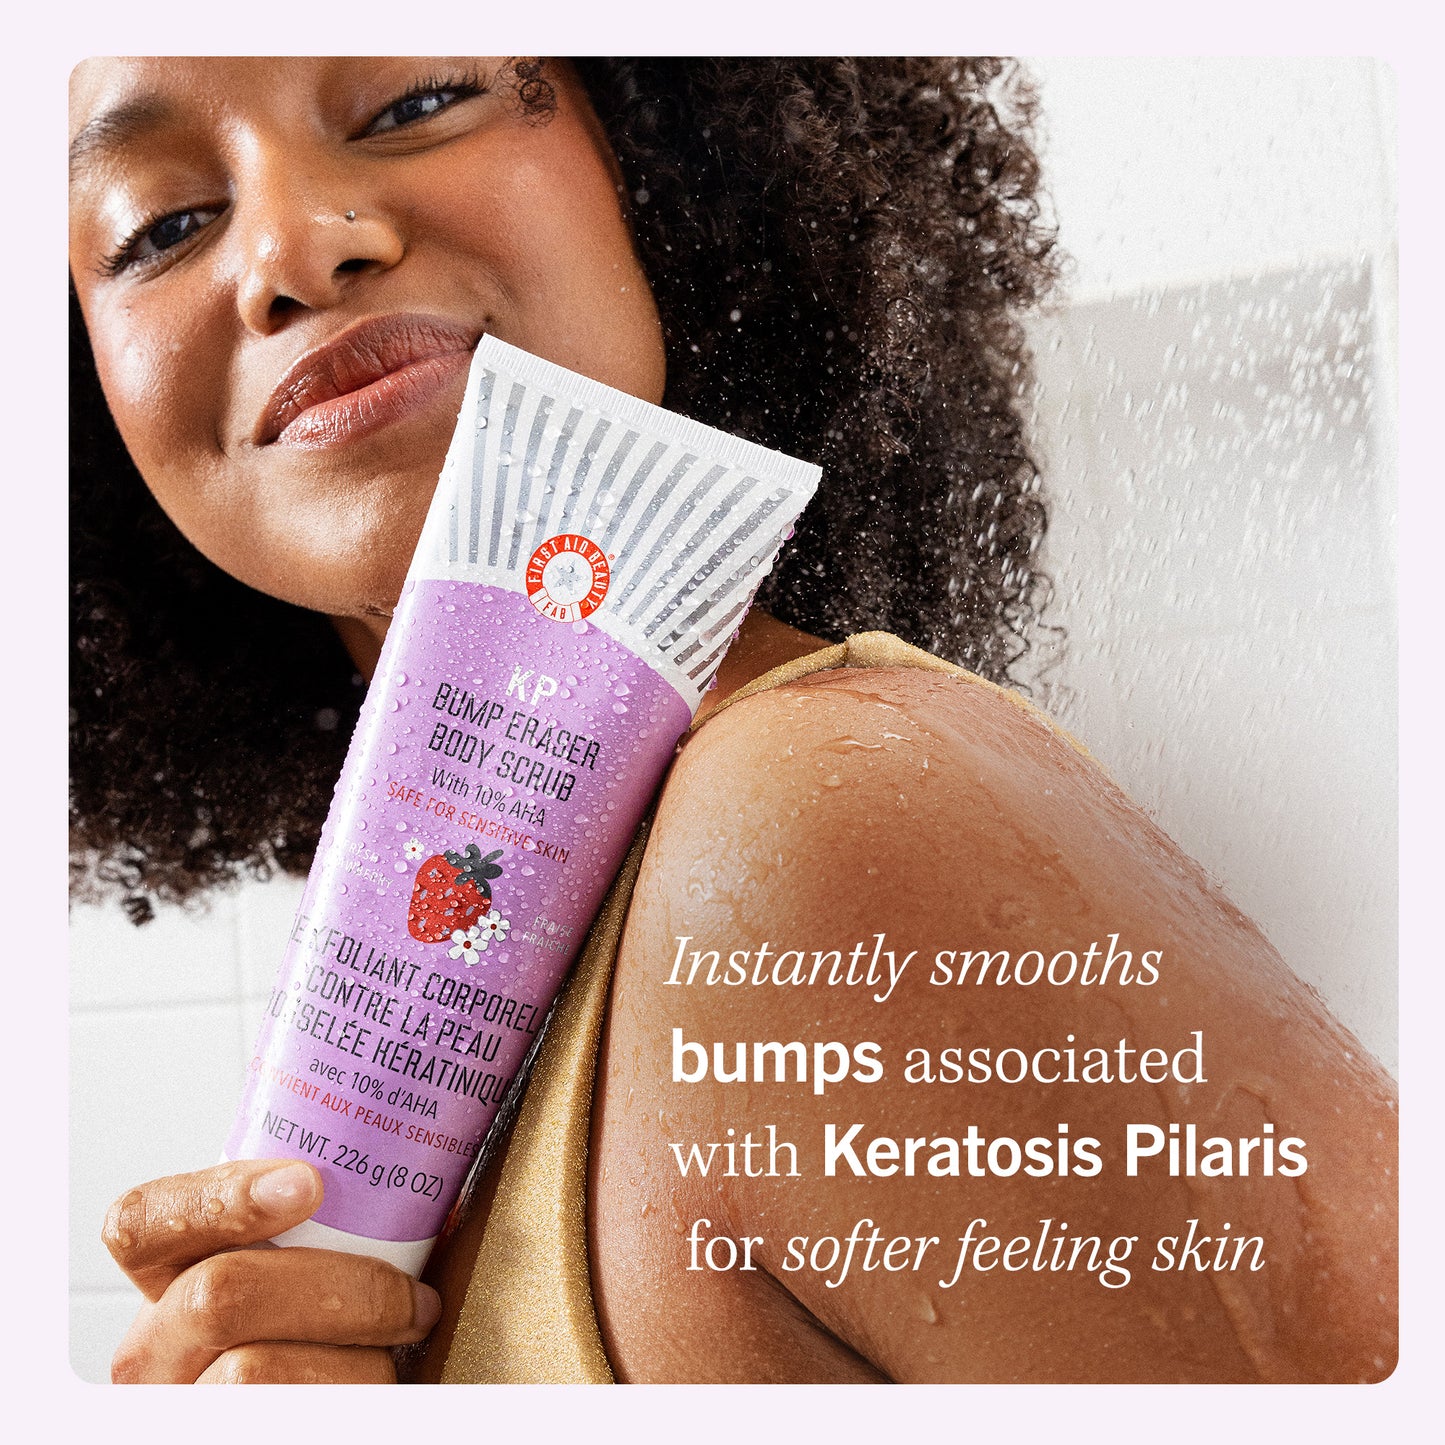 Model holding KP Bump Eraser Body Scrub Fresh Strawberry.  Instantly smooths bumps associated with Keratosis Pilaris for softer feeling skin.